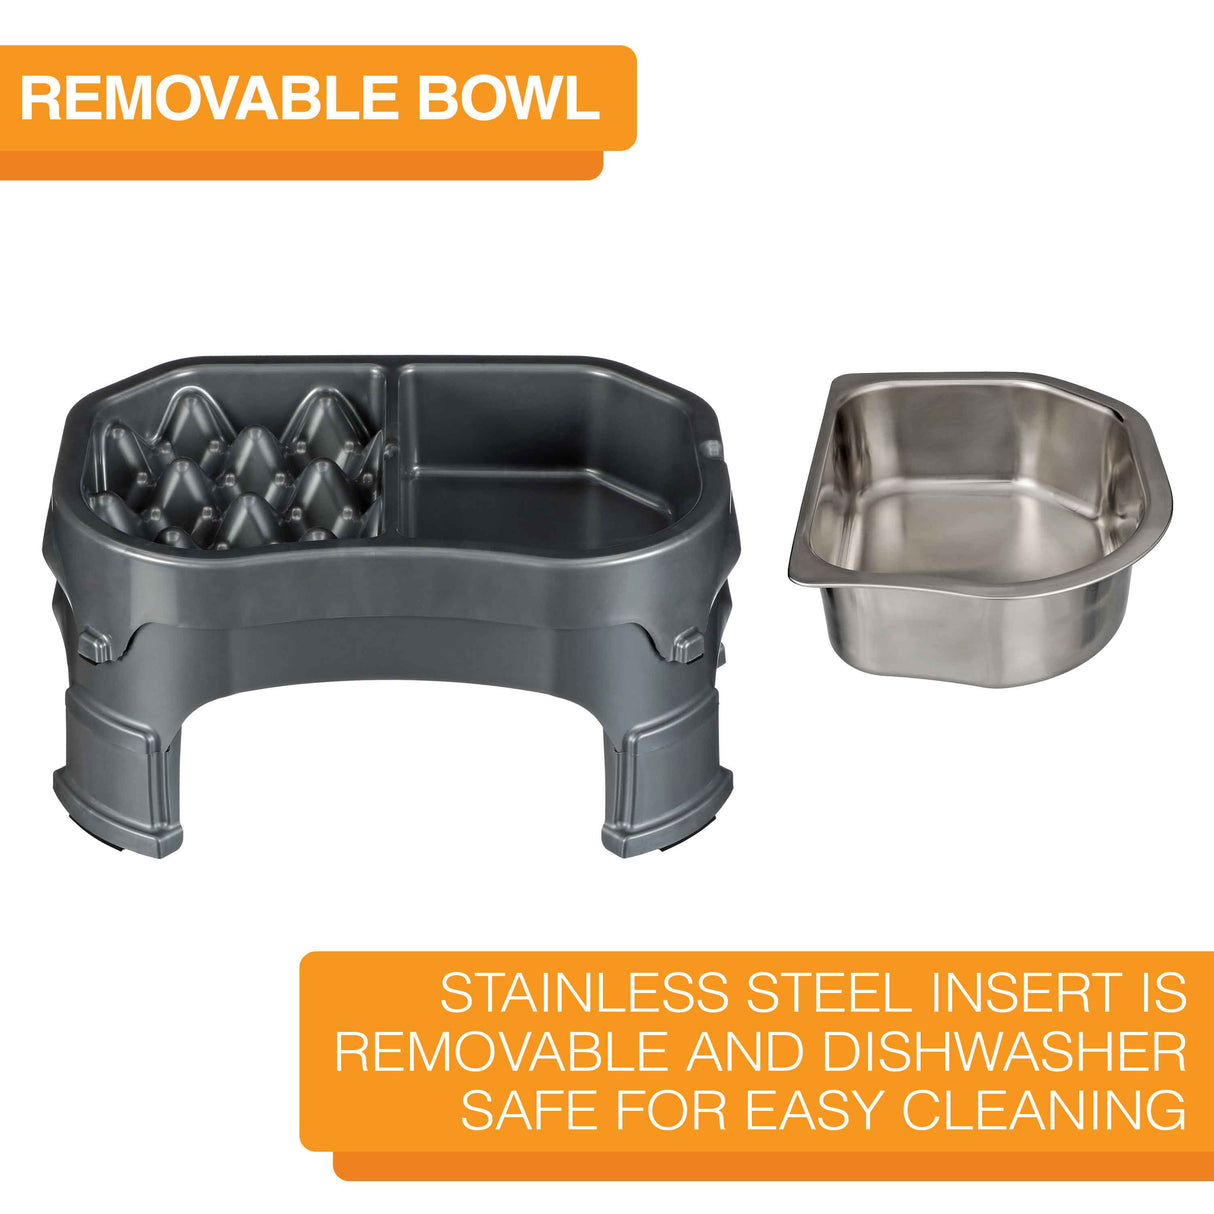 The Double Diner stainless steel insert is removeable and dishwasher safe